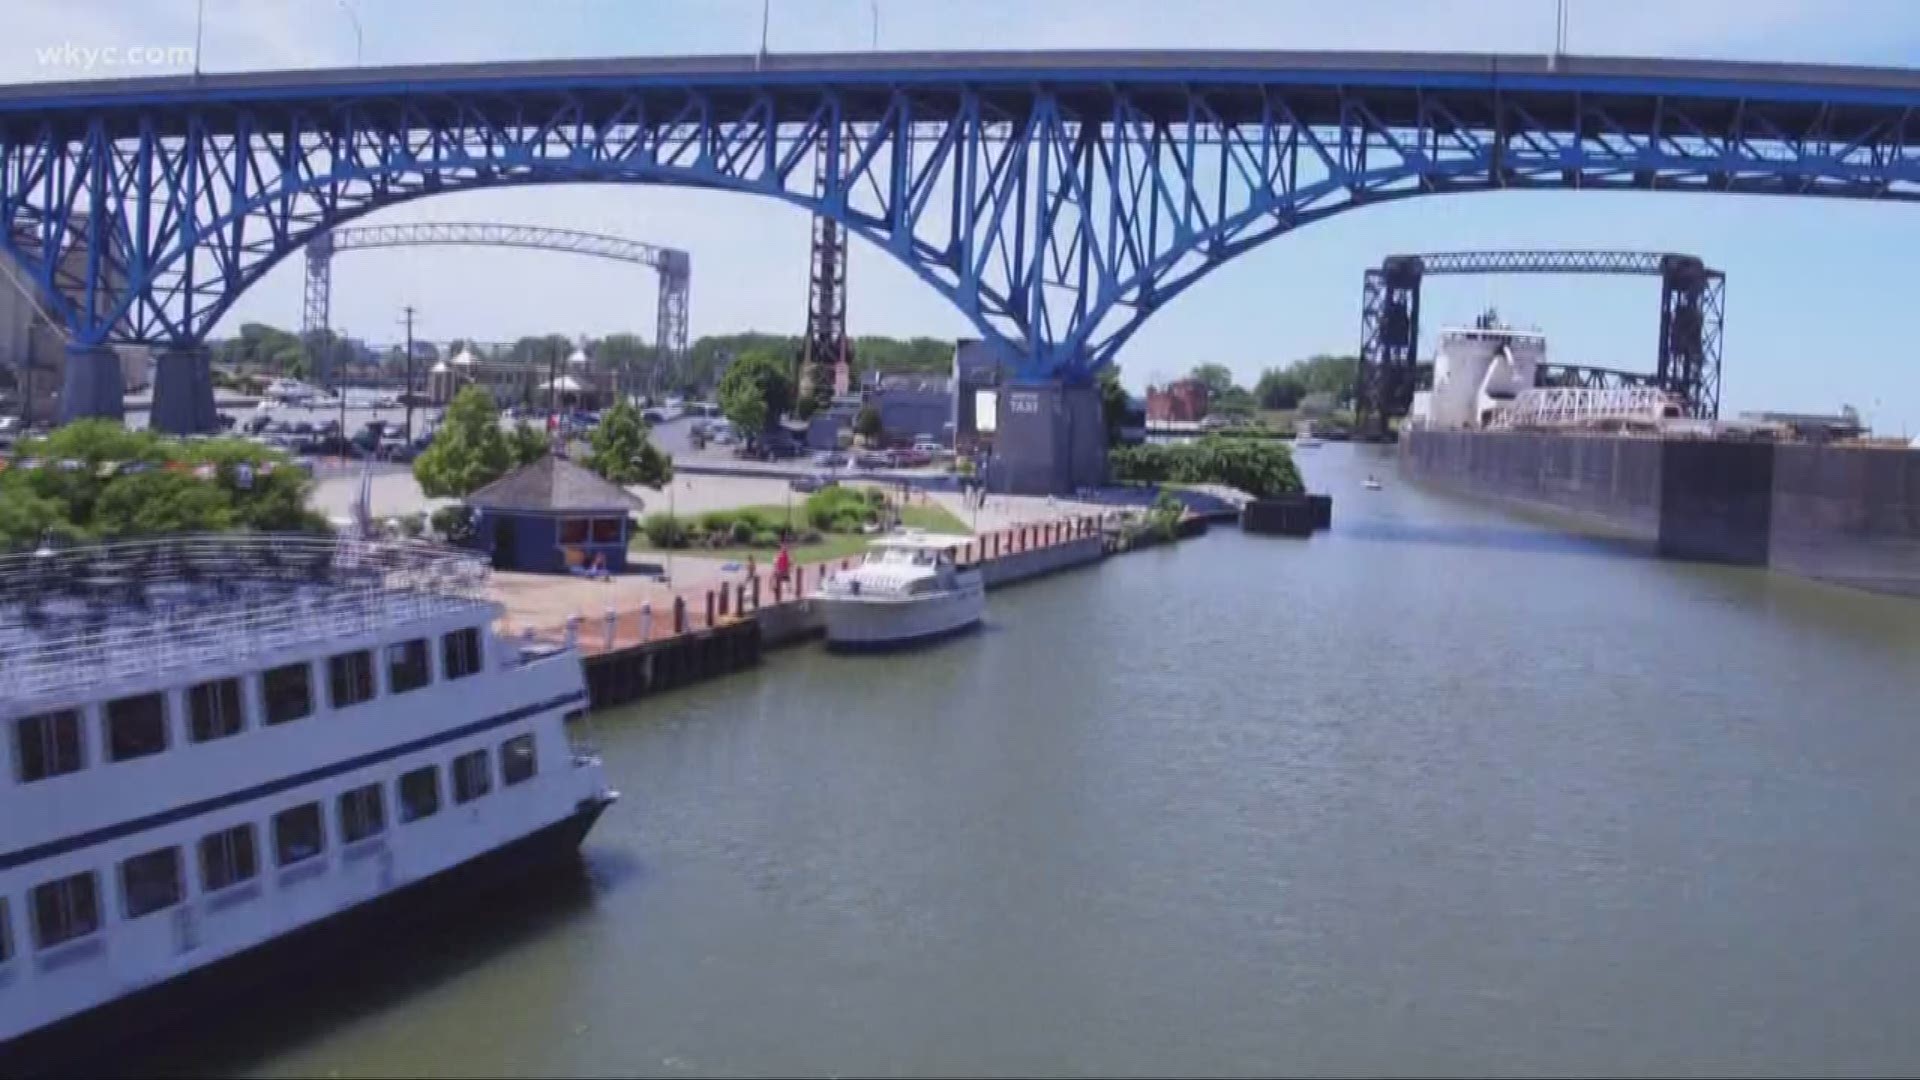 April 17, 2019: This June marks 50 years since the Cuyahoga River caught fire. Now, it’s being honored as America’s 'river of the year.' The designation comes from American Rivers, which says the Cuyahoga River’s rebirth is an inspiration for other cities.